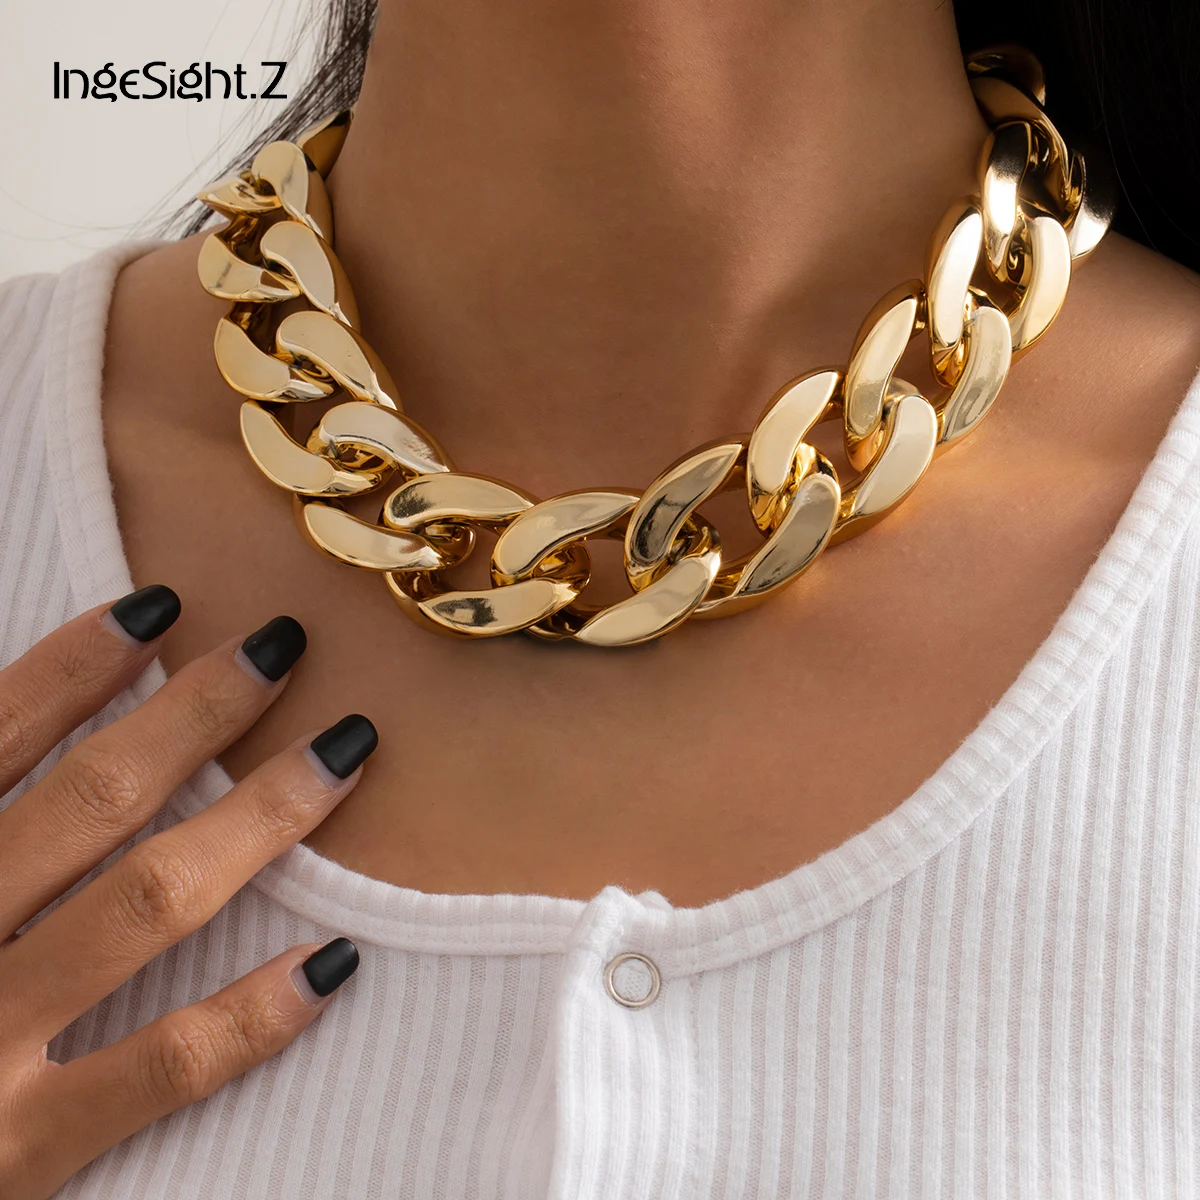 

IngeSight.Z Hip Hop Chunky Thick CCB Plastic Curb Chain Choker Necklace Punk Exaggerated Short Clavicle Necklace Collier Jewelry